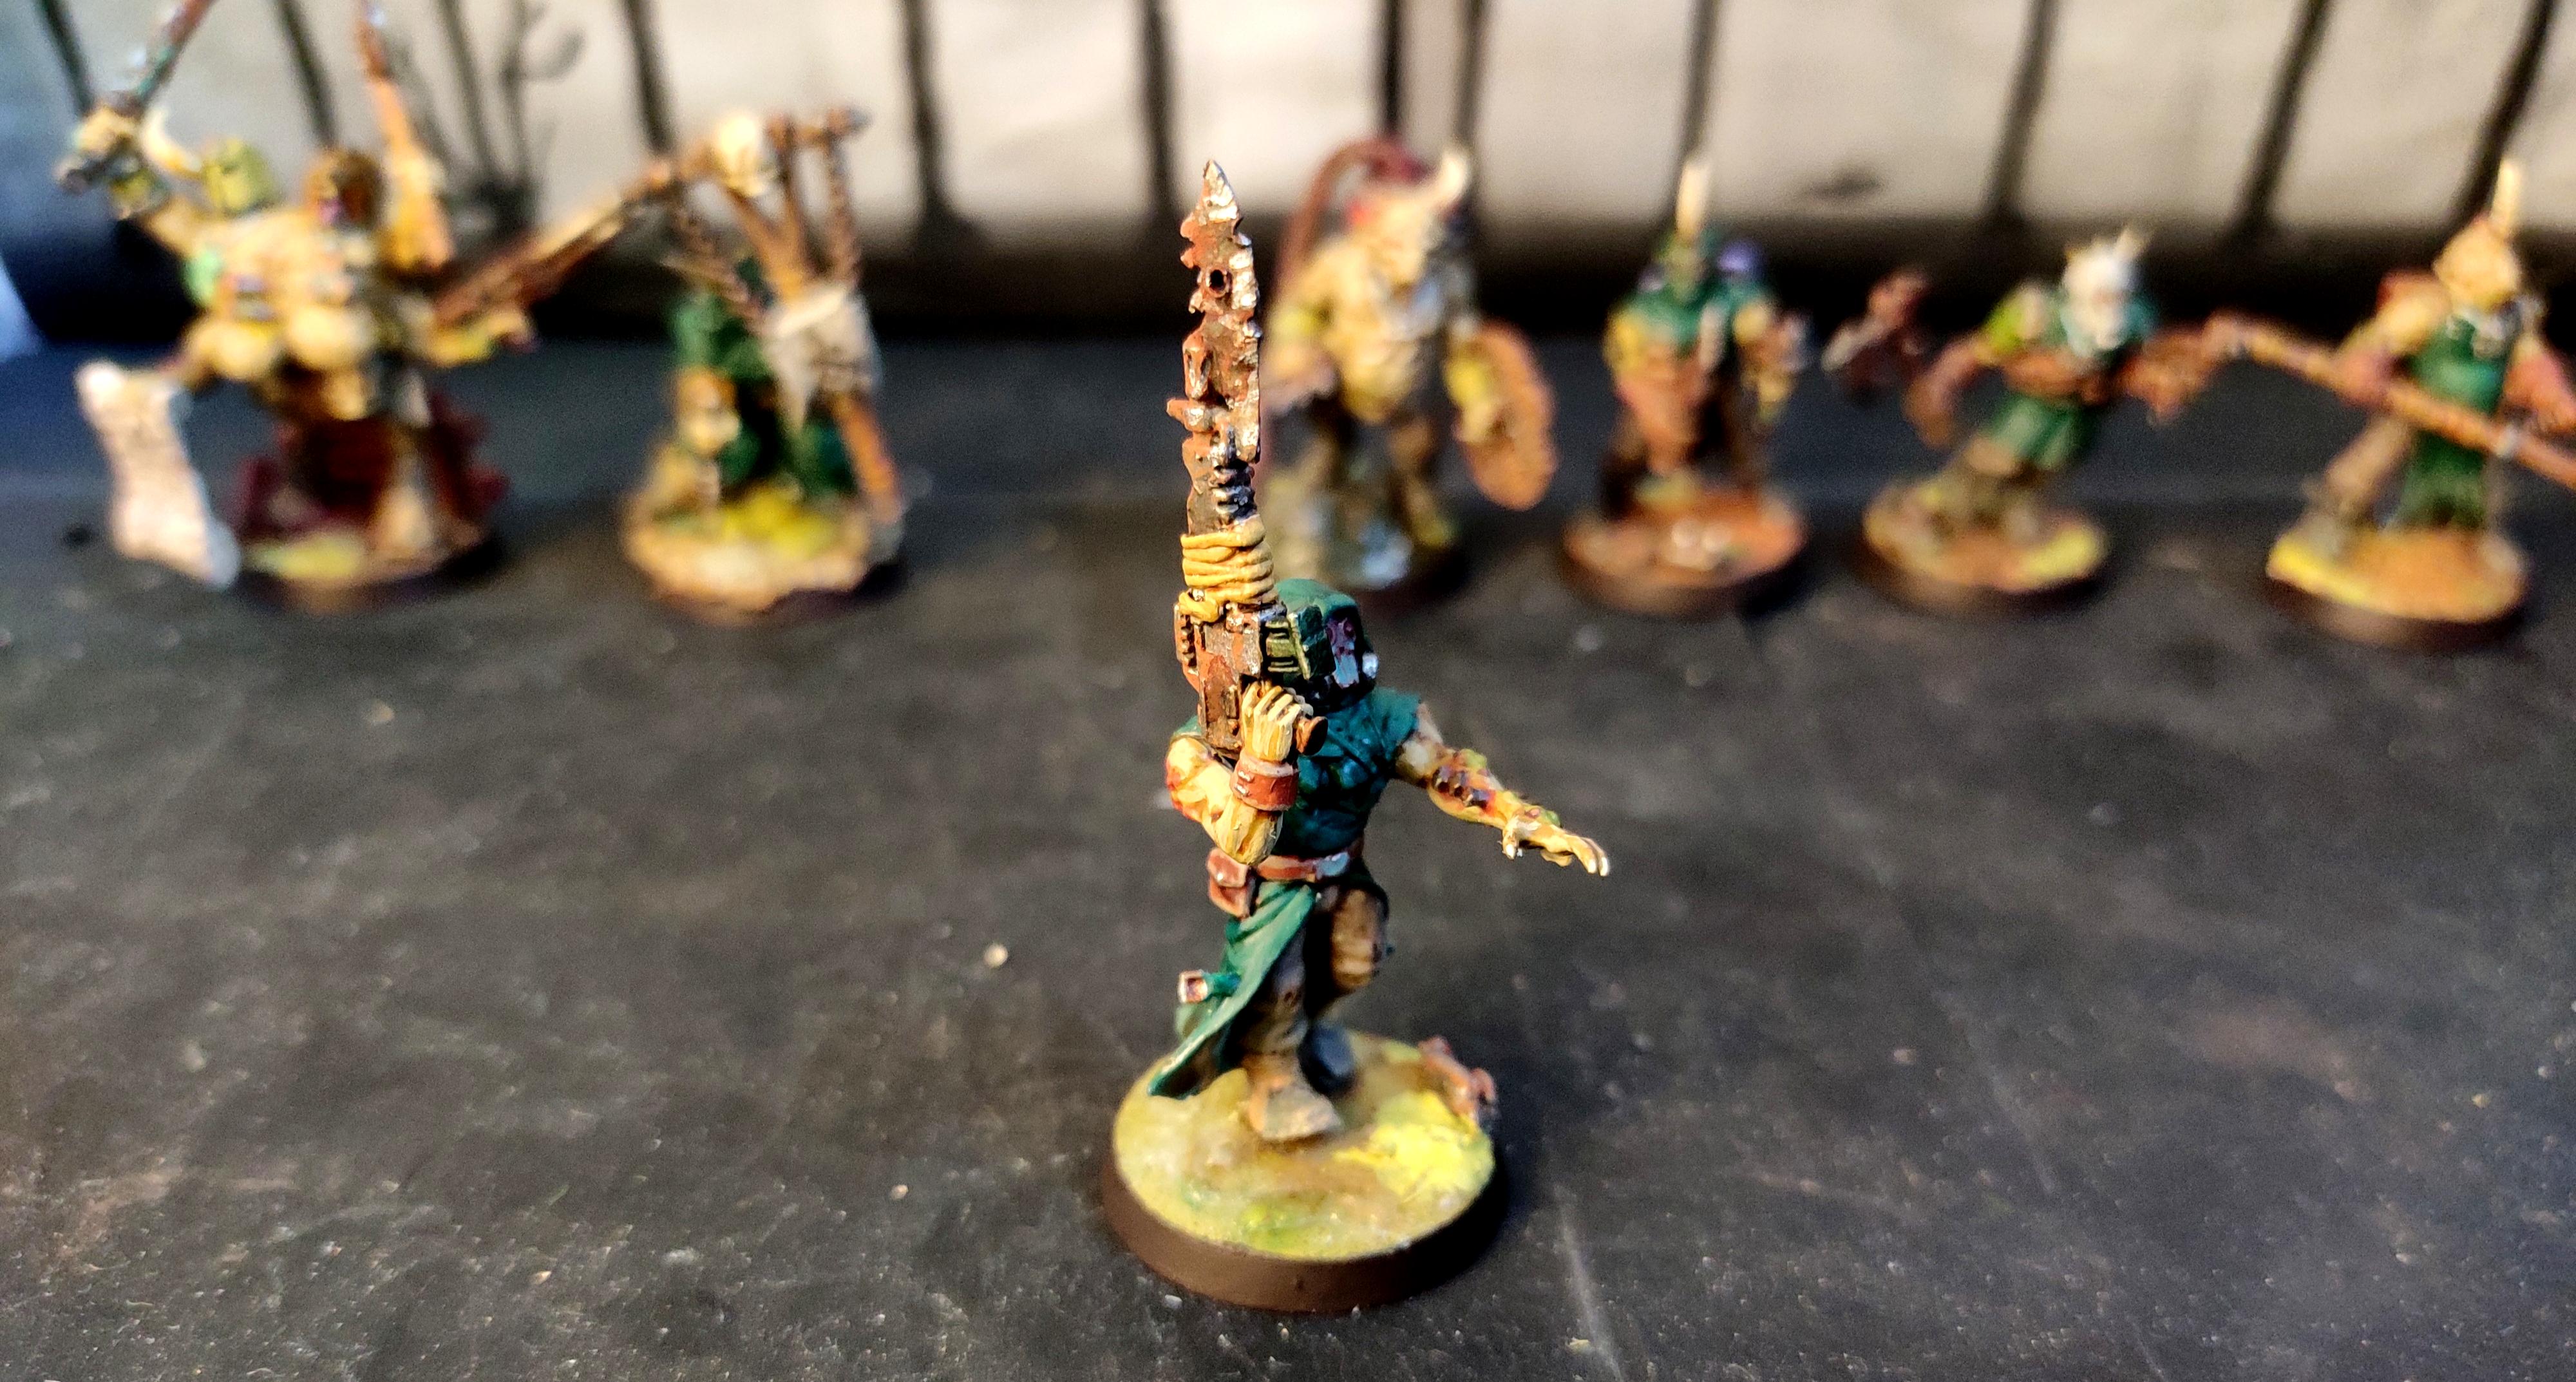 Autogun, Blight, Chaos, Chaos Cultists, Conversion, Cult, Cultists, Dark Vengeance, Decay, Disease, Heresy, Heretics, Infantry, Kitbash, Lost And The Damned, Nurgle, Pestilence, Plague, Regiment, Renegade, Rot, Warhammer 40,000